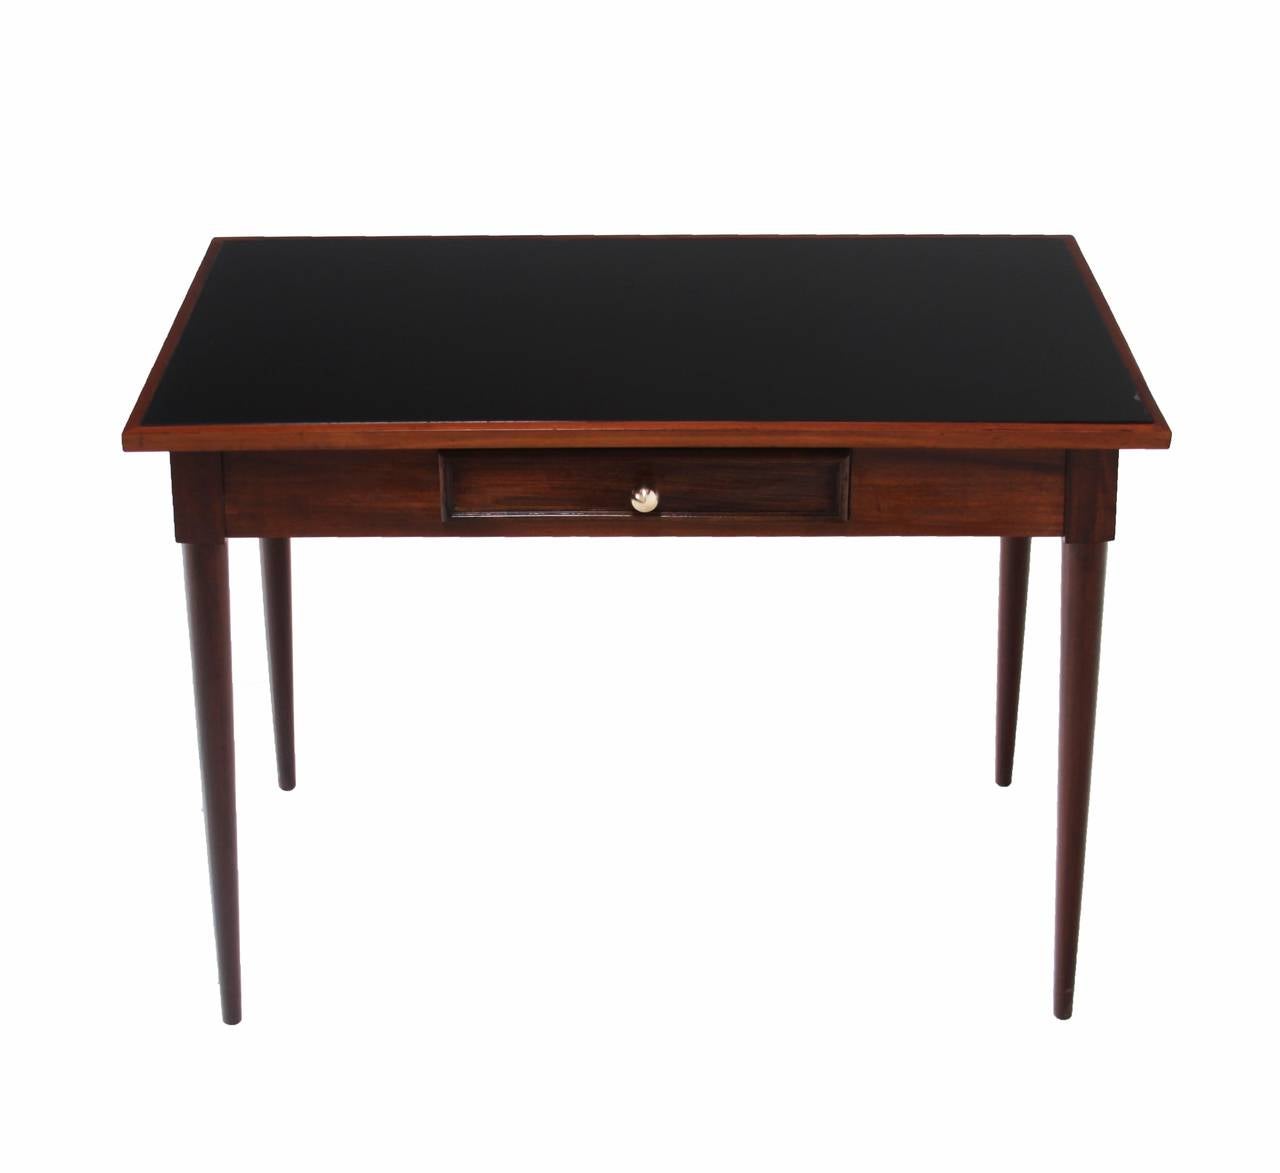 A vintage Freijo wood desk or console table from Brazil by Giuseppe Scapinelli for Moveis Tepperman with tapered legs, reverse painted black glass top, and a single drawer with polished brass pull.

In order to preserve our inventory, after